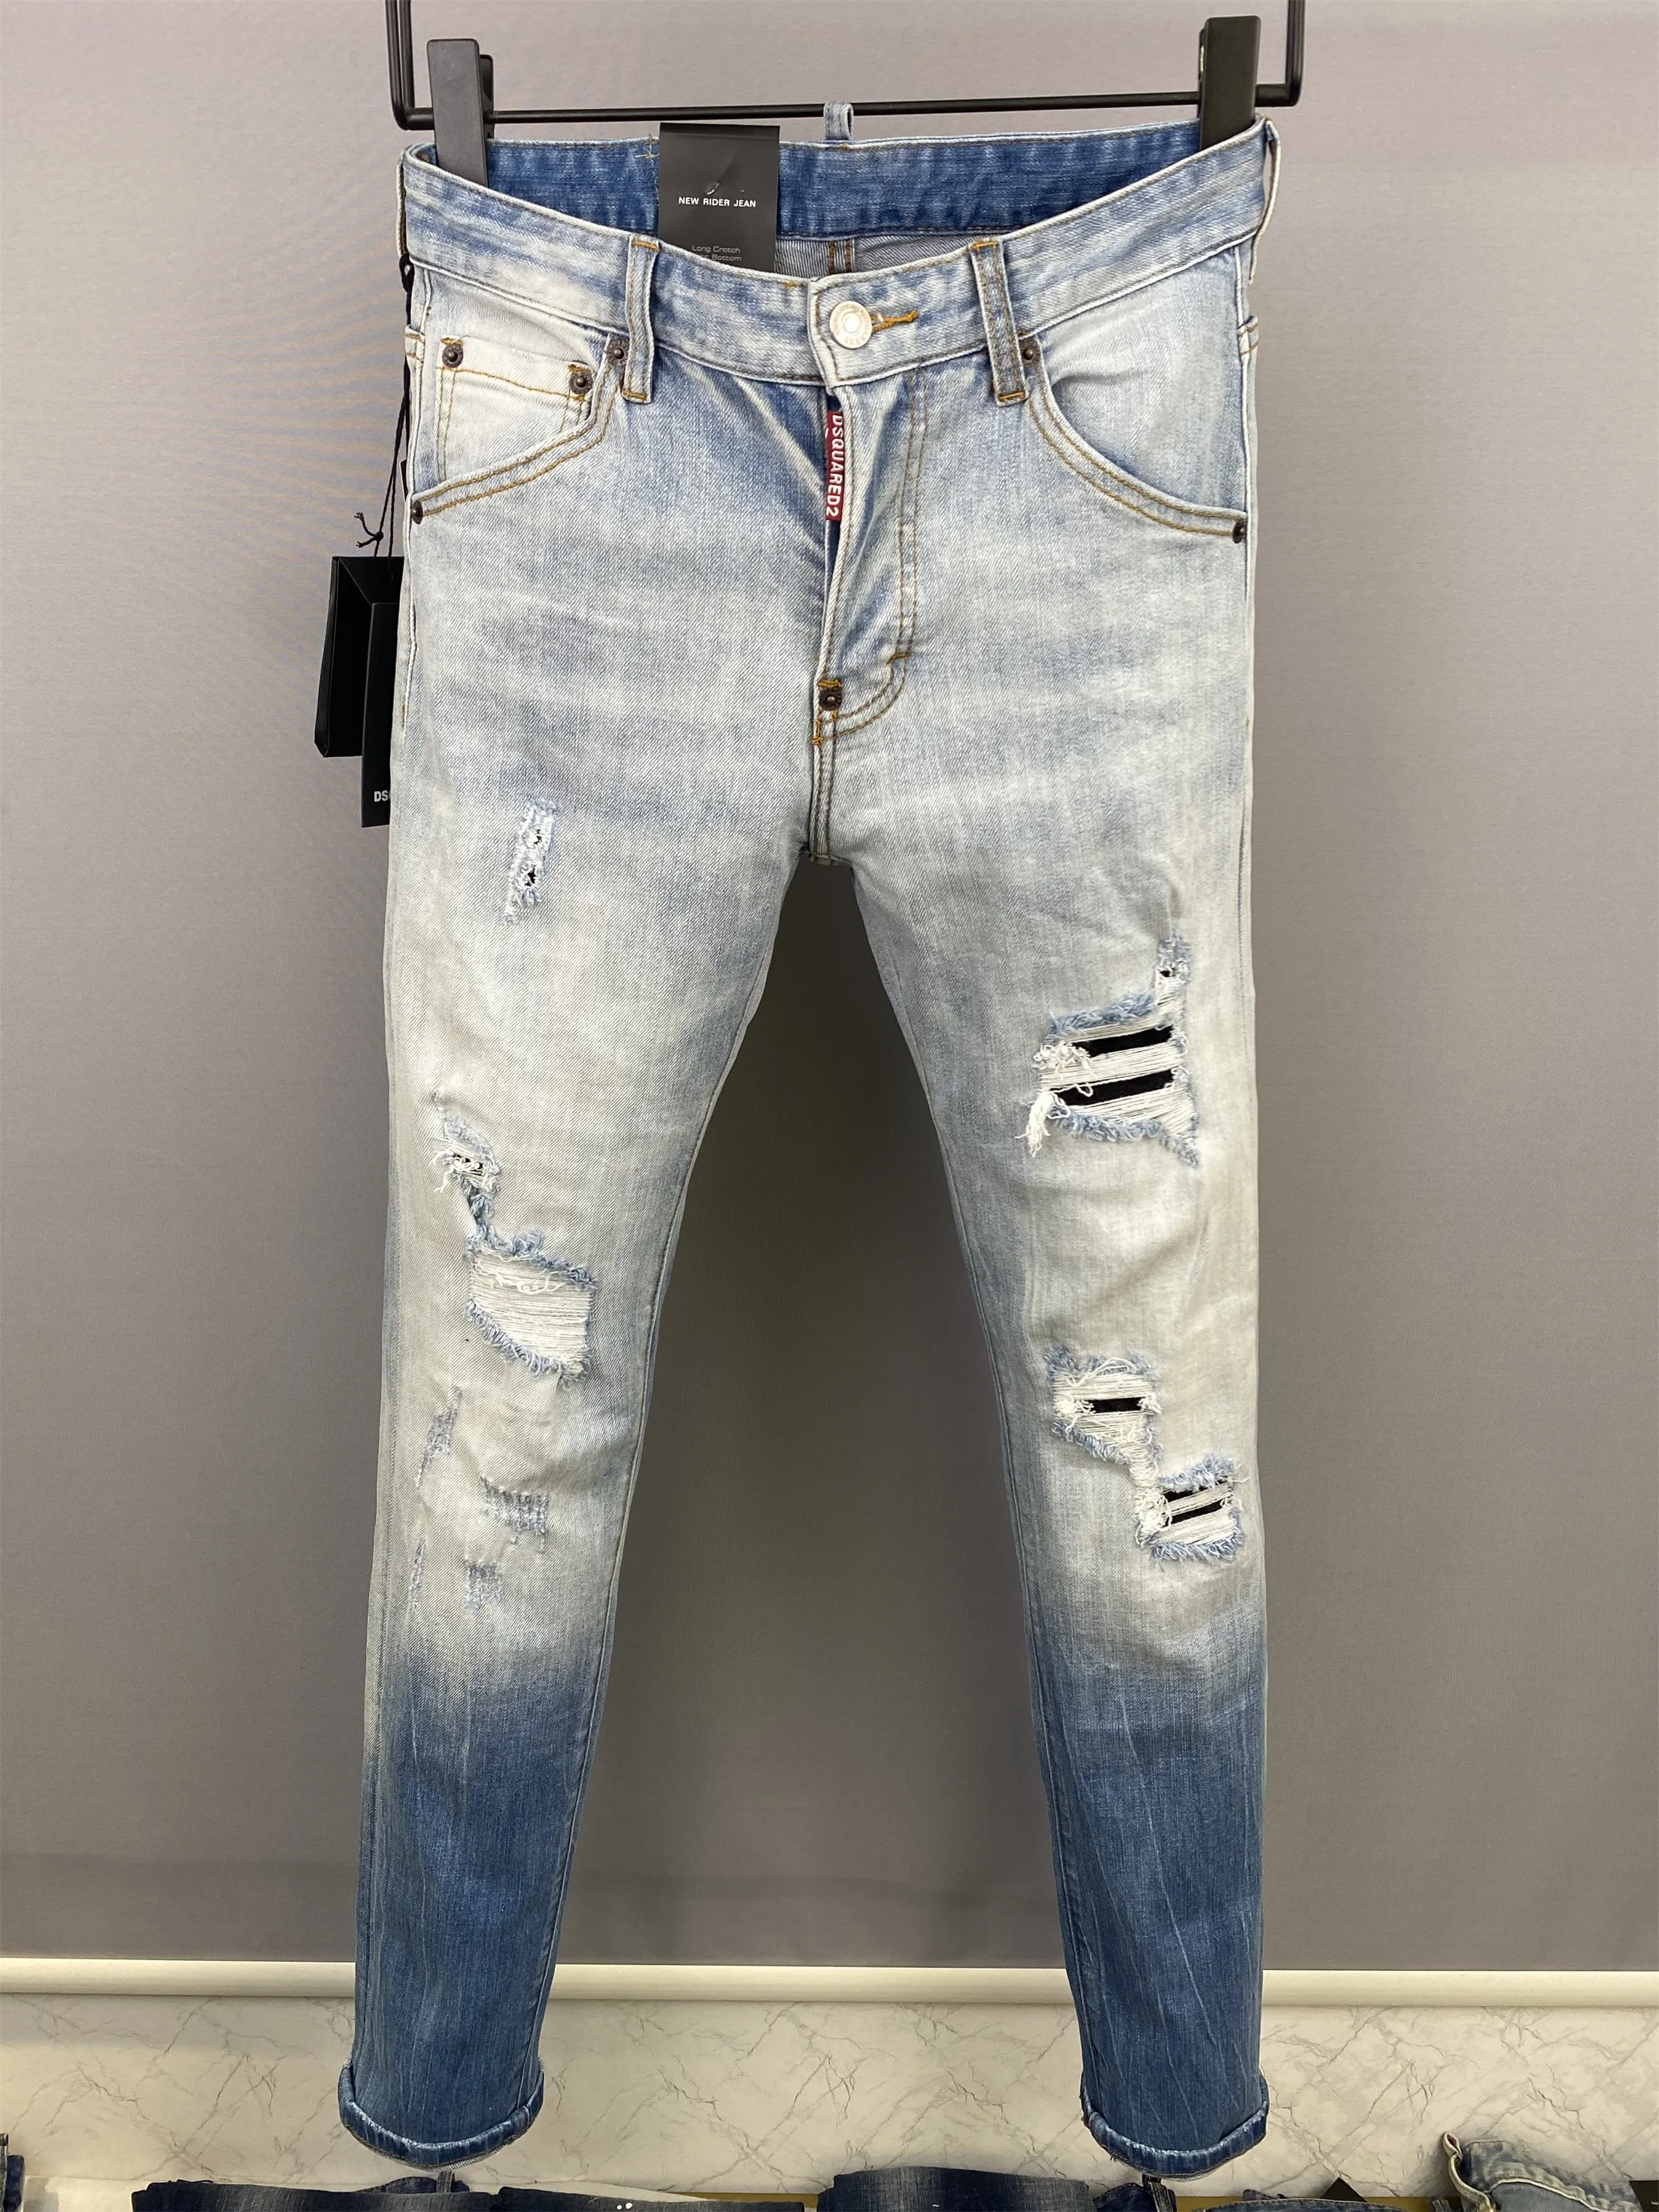 

2023 Patchwork Denim Long Jeans Fashion Hole Patch Broken Ink Paint Pants DSQUARED2 Printed Cool Tight Long Pants Cool Outwear